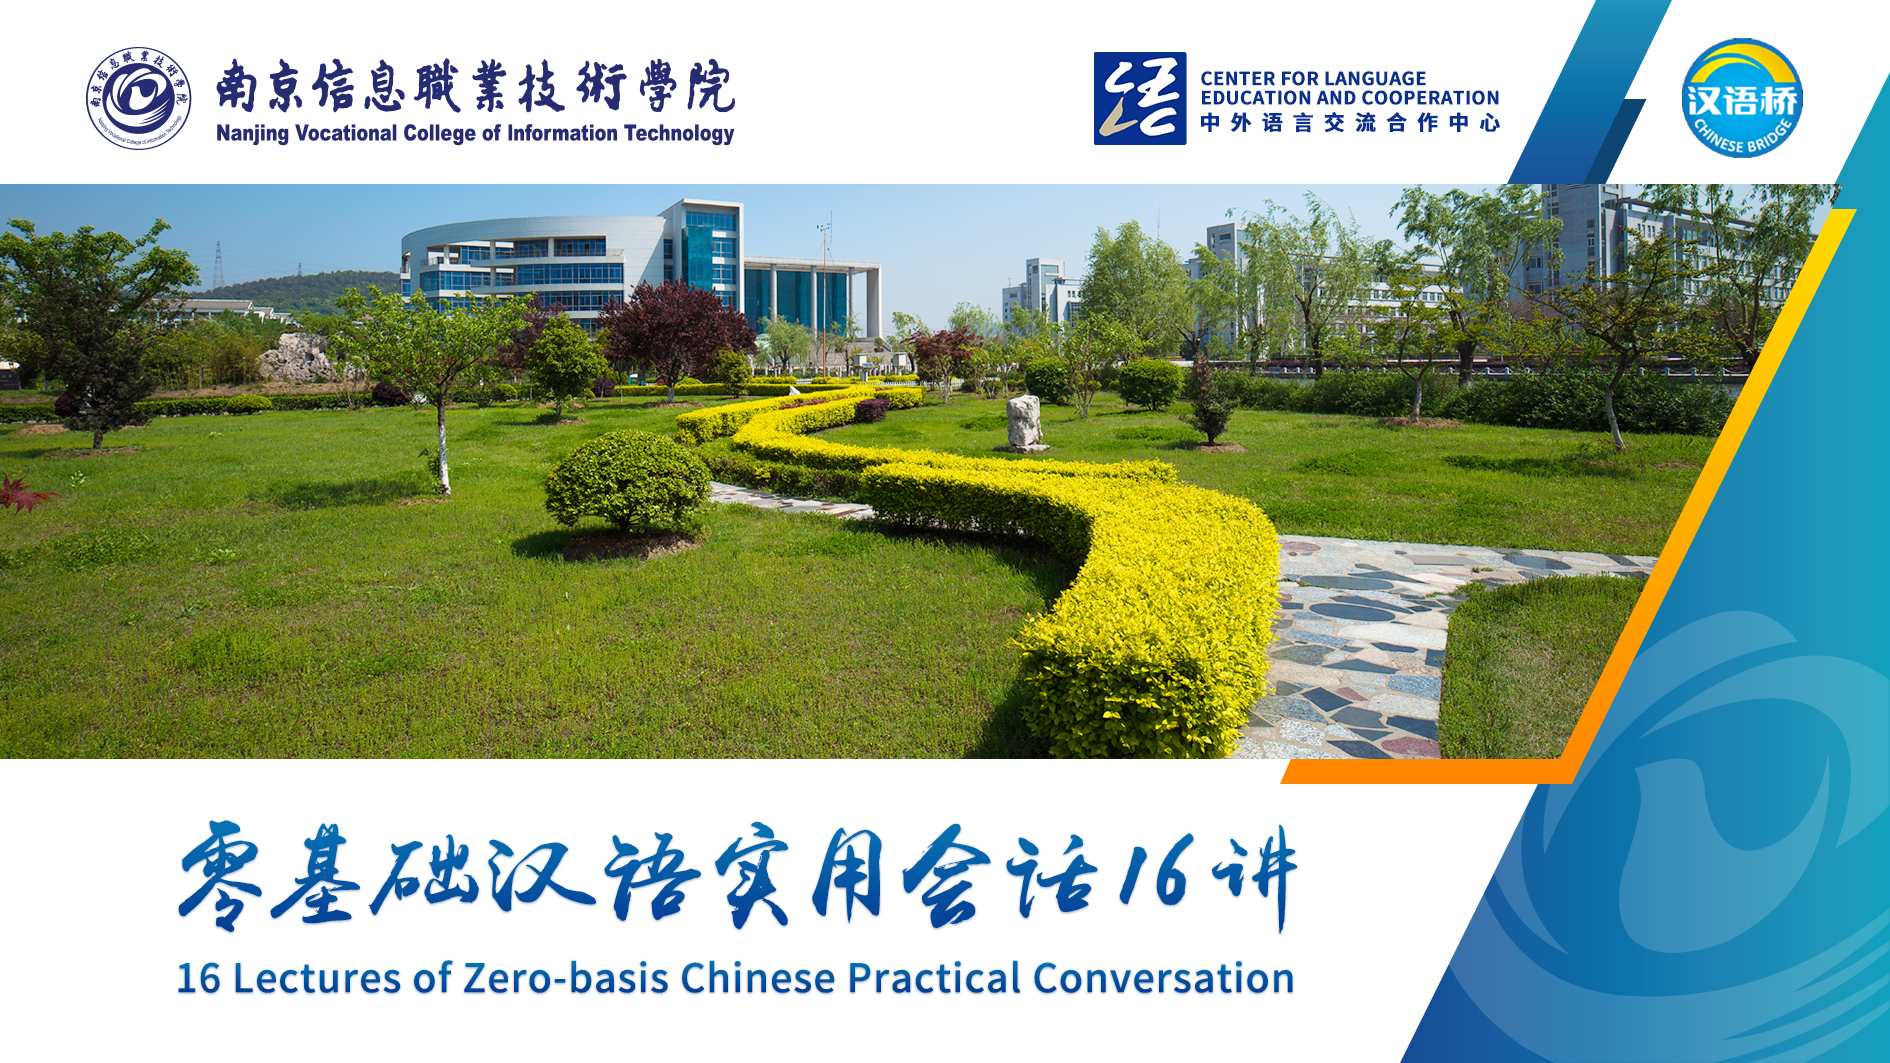 16 Lectures of Zero-basis Chinese Practical Conversation